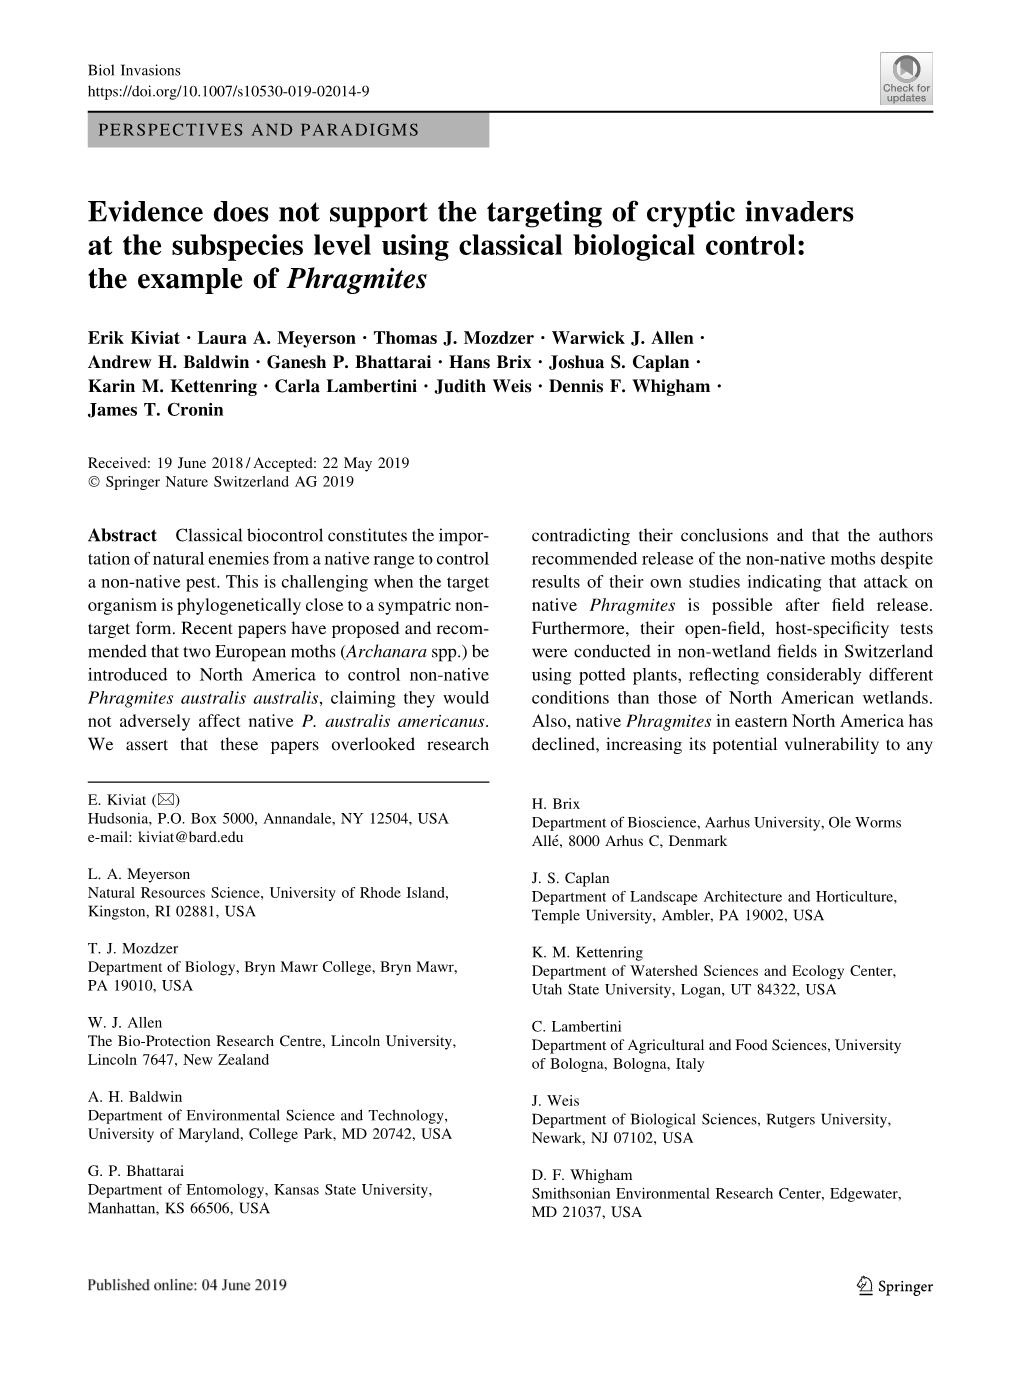 Evidence Does Not Support the Targeting of Cryptic Invaders at the Subspecies Level Using Classical Biological Control: the Example of Phragmites